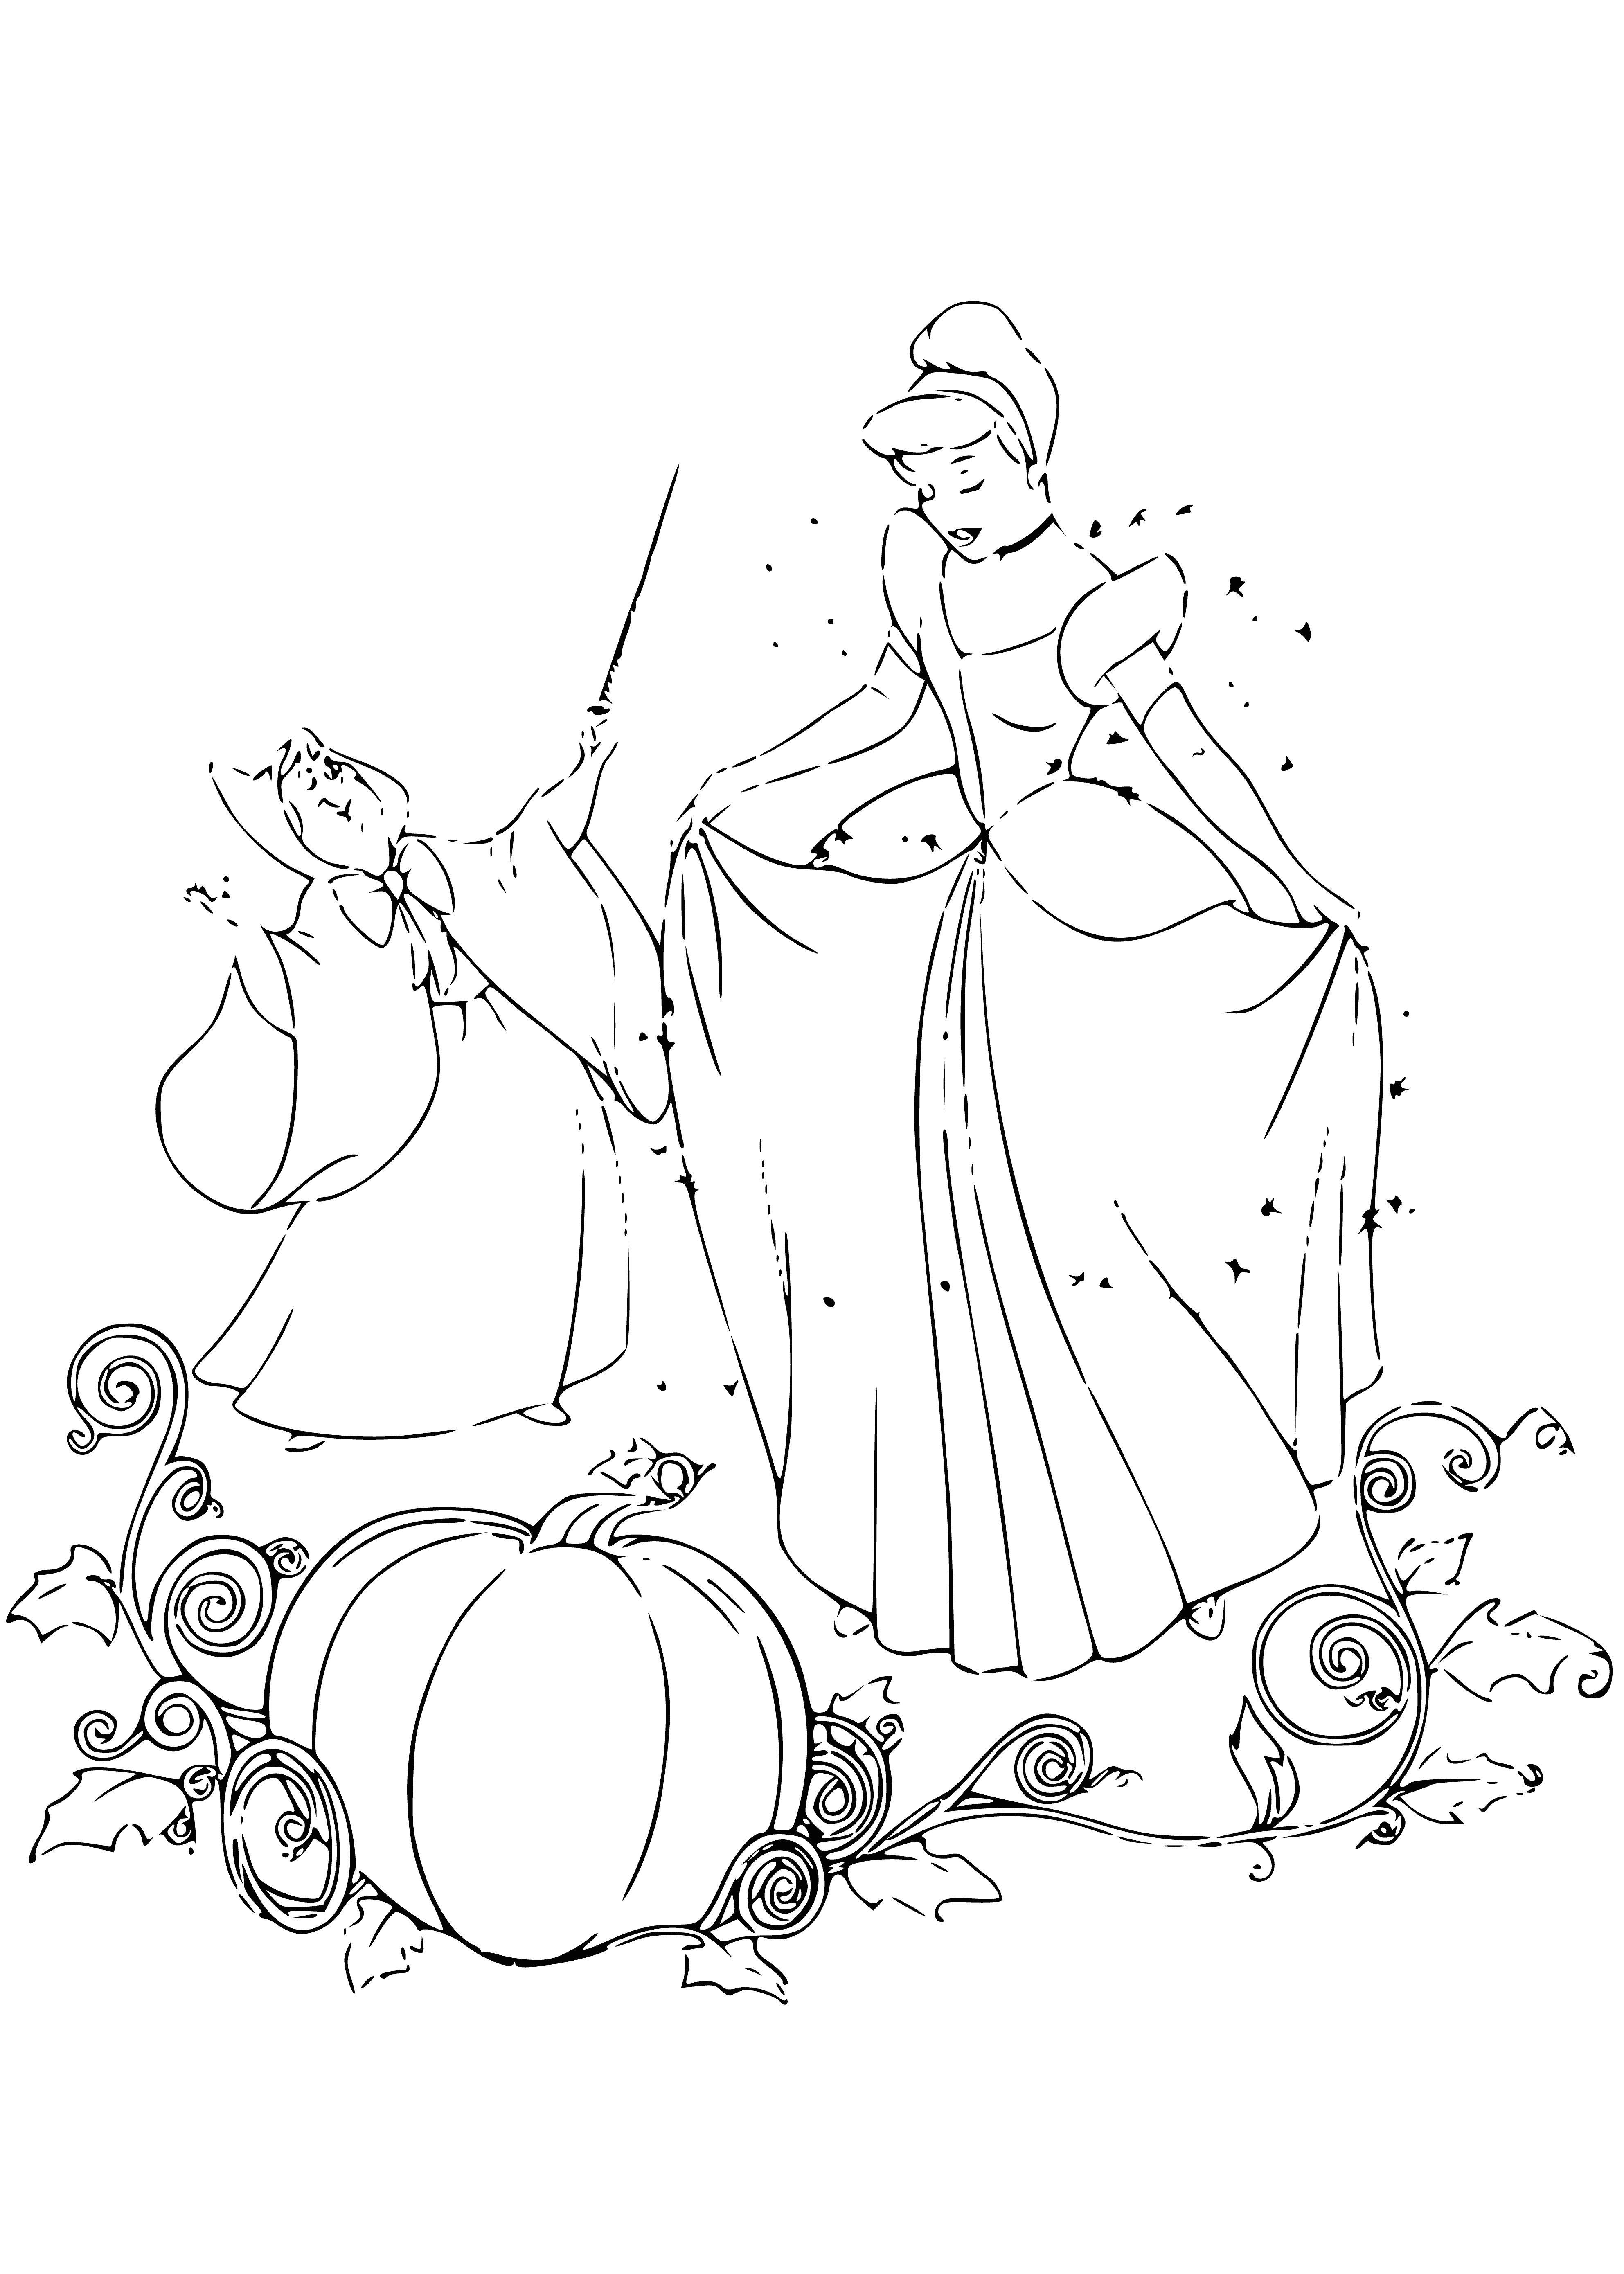 coloring page: Fairy Godmother gives Cinderella makeover into a beautiful princess w/ white gown, blue sash & hair pulled into an updo. Smiling, she looks very pleased with her work.